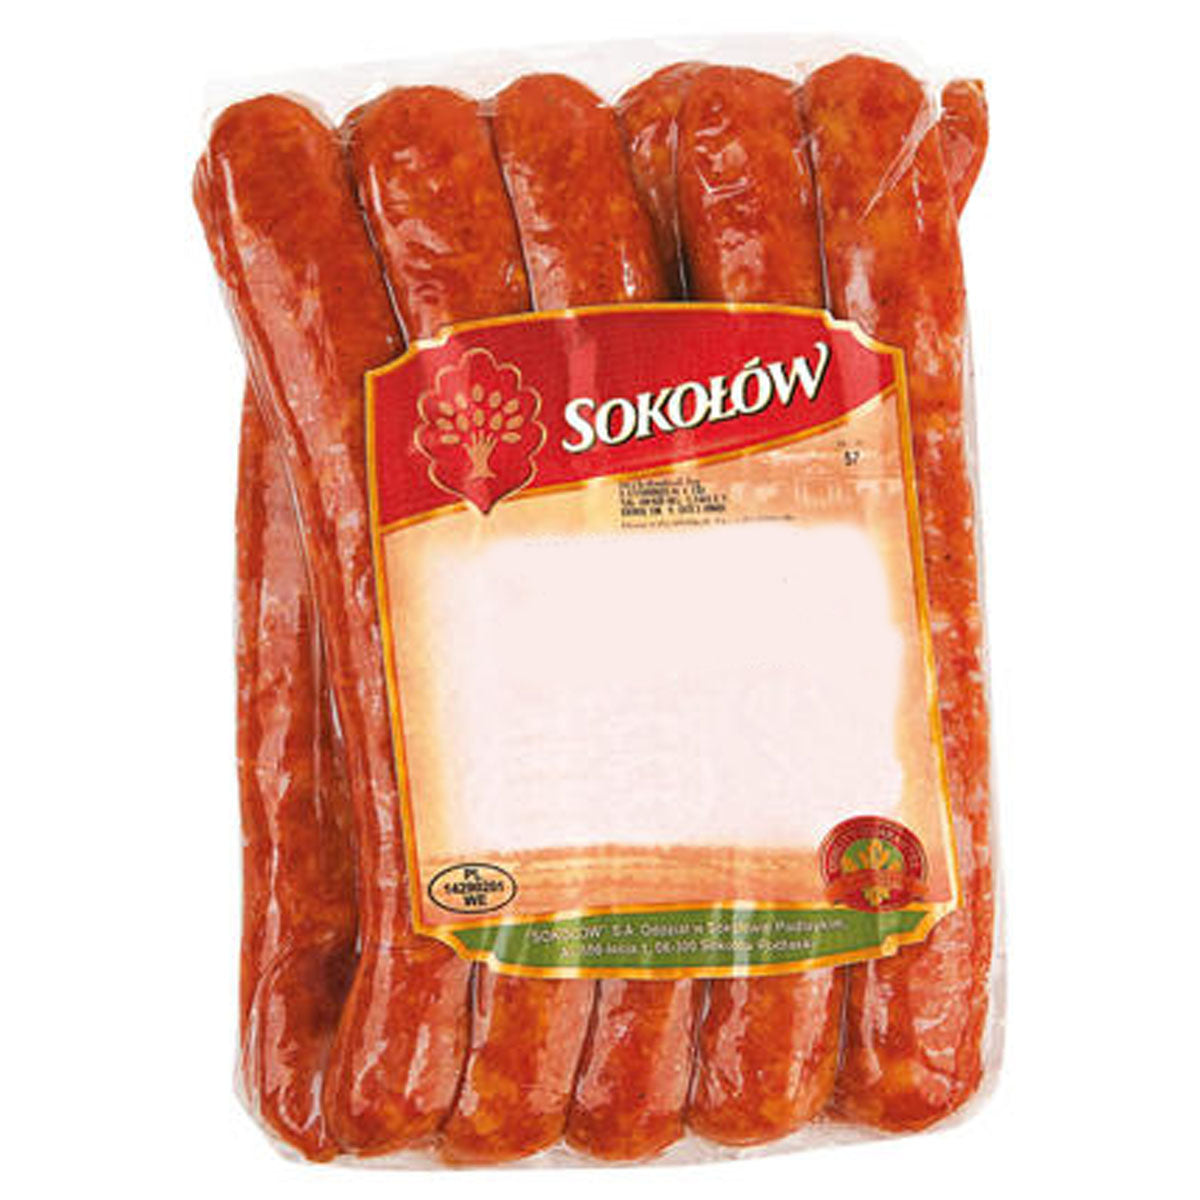 Sokolow - Small Silesian Sausage - 350g - Continental Food Store